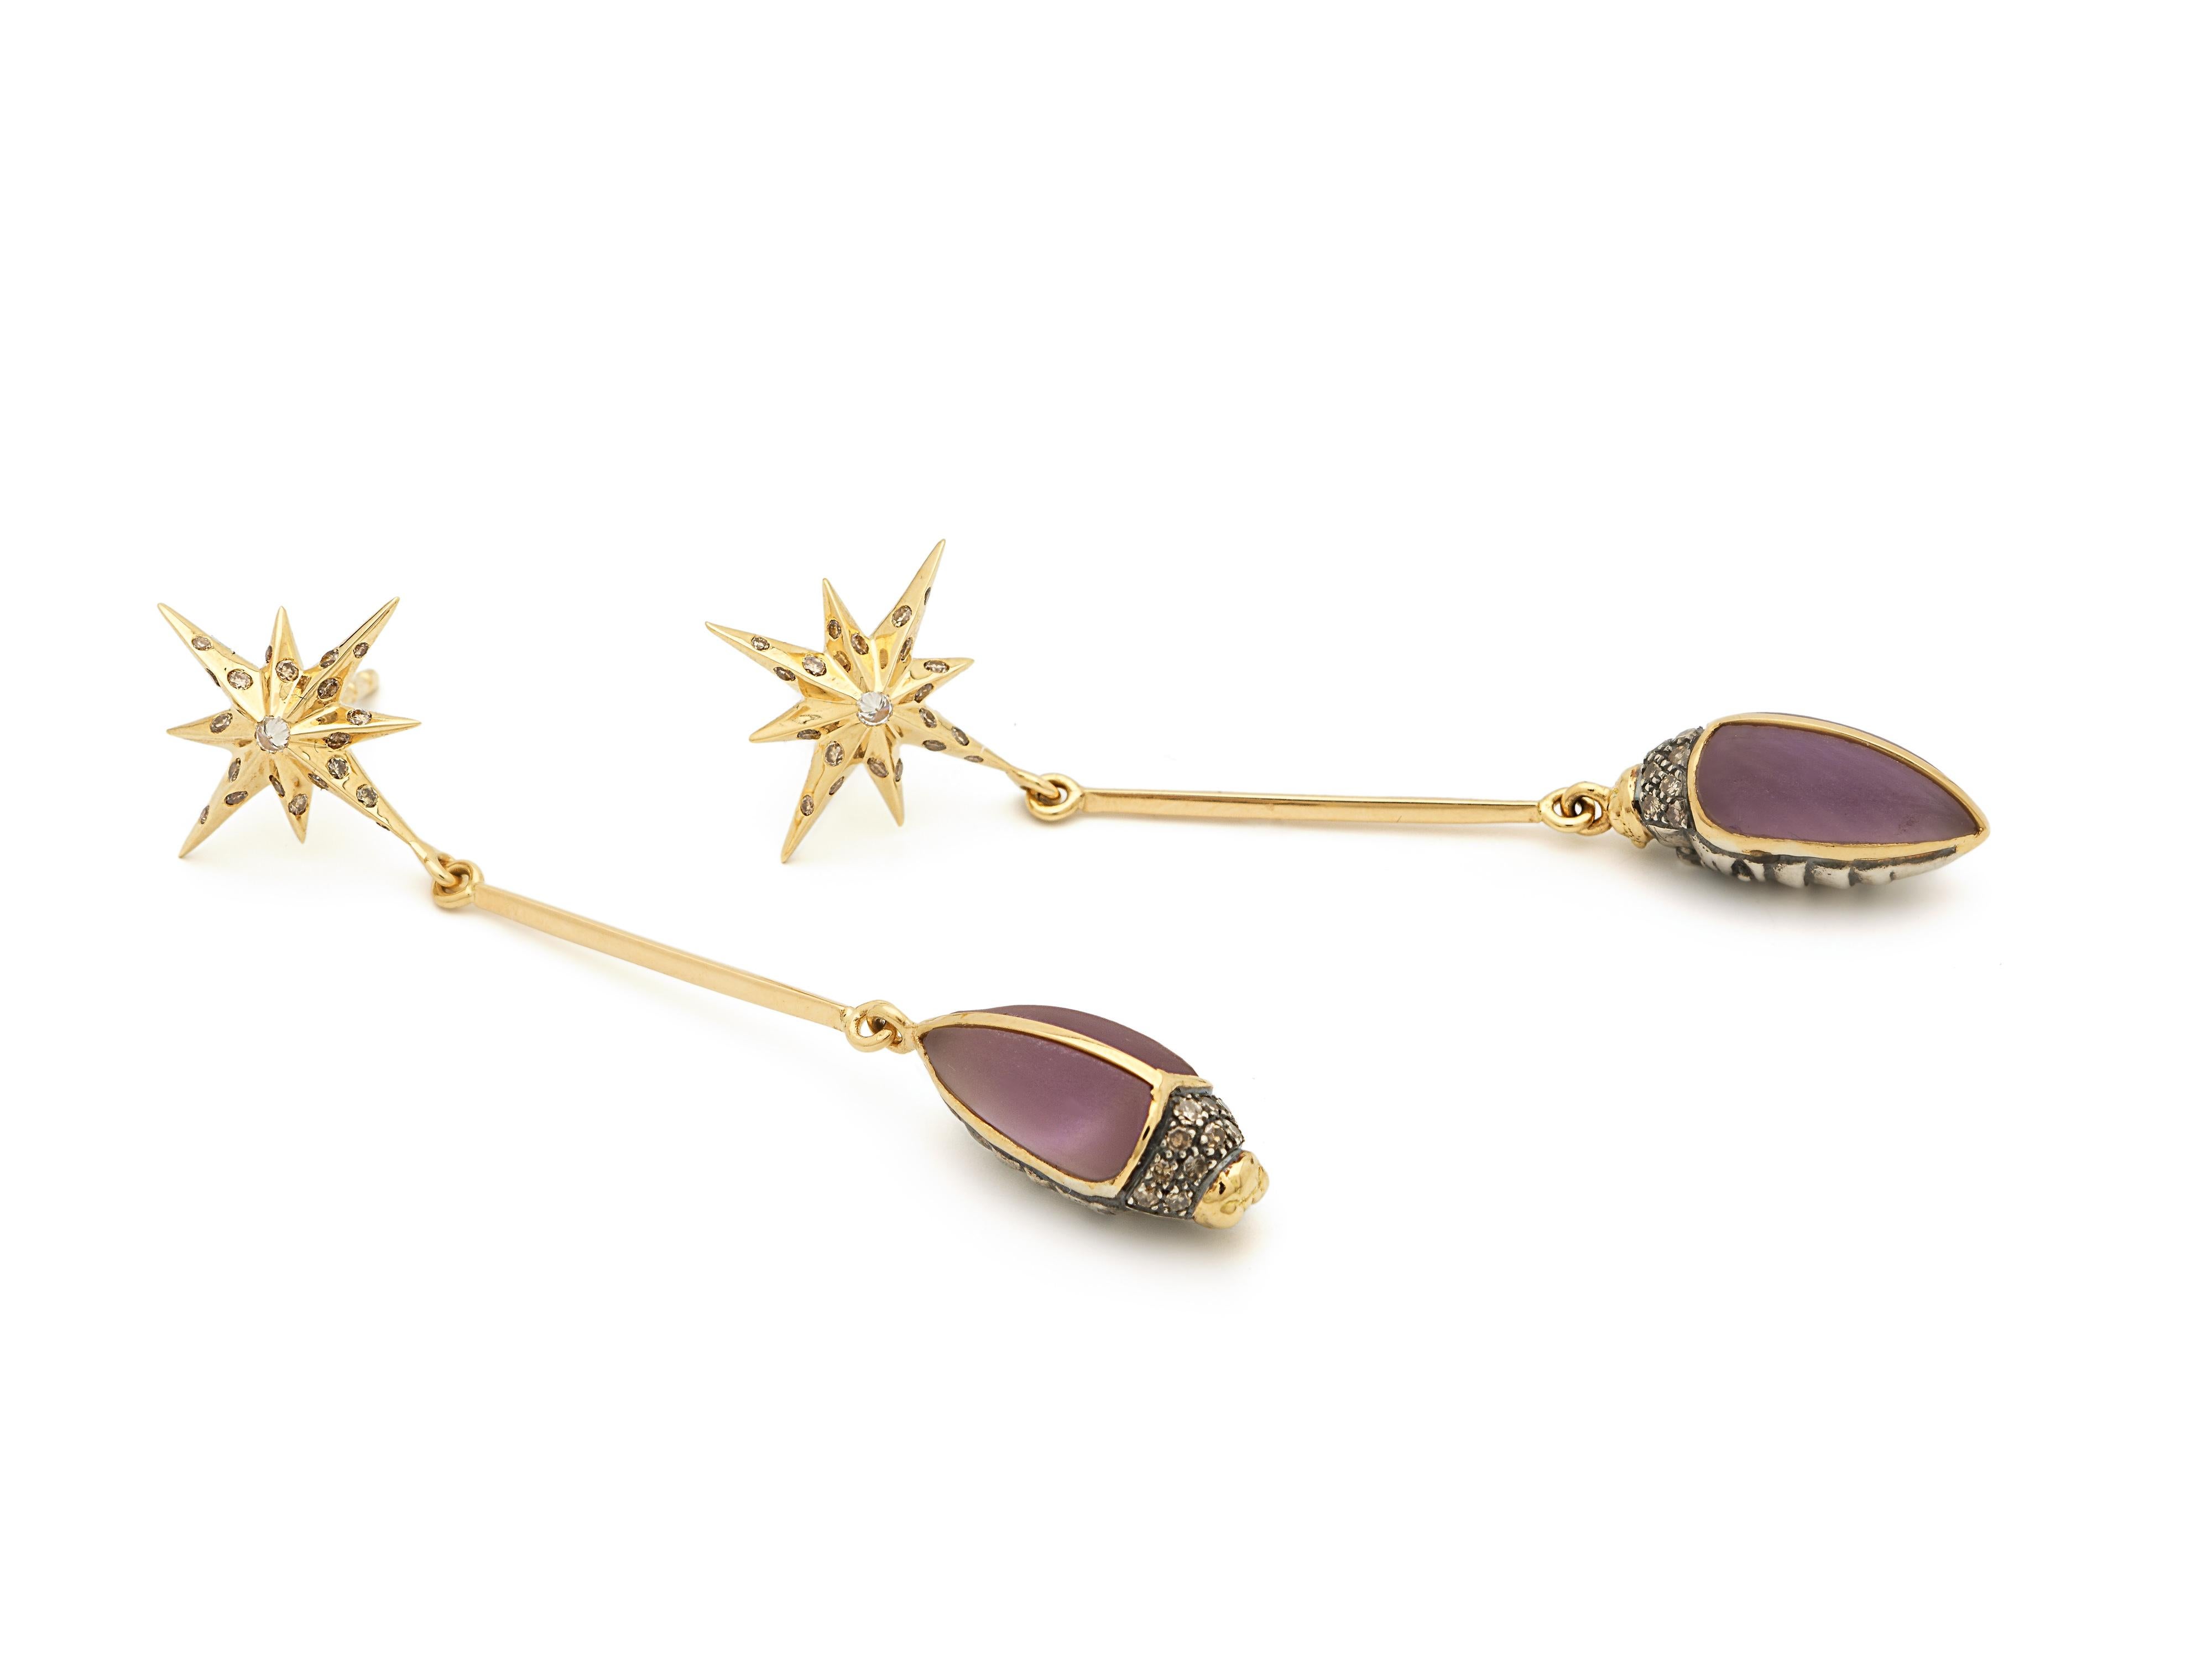 Sleek and graphic, these drop earrings are crafted as fine bars in 18k yellow gold, and are set with dazzling, diamond-embellished star motifs at the posts. The scarab motifs at the drop are fashioned in 18k yellow gold and sterling silver, and set